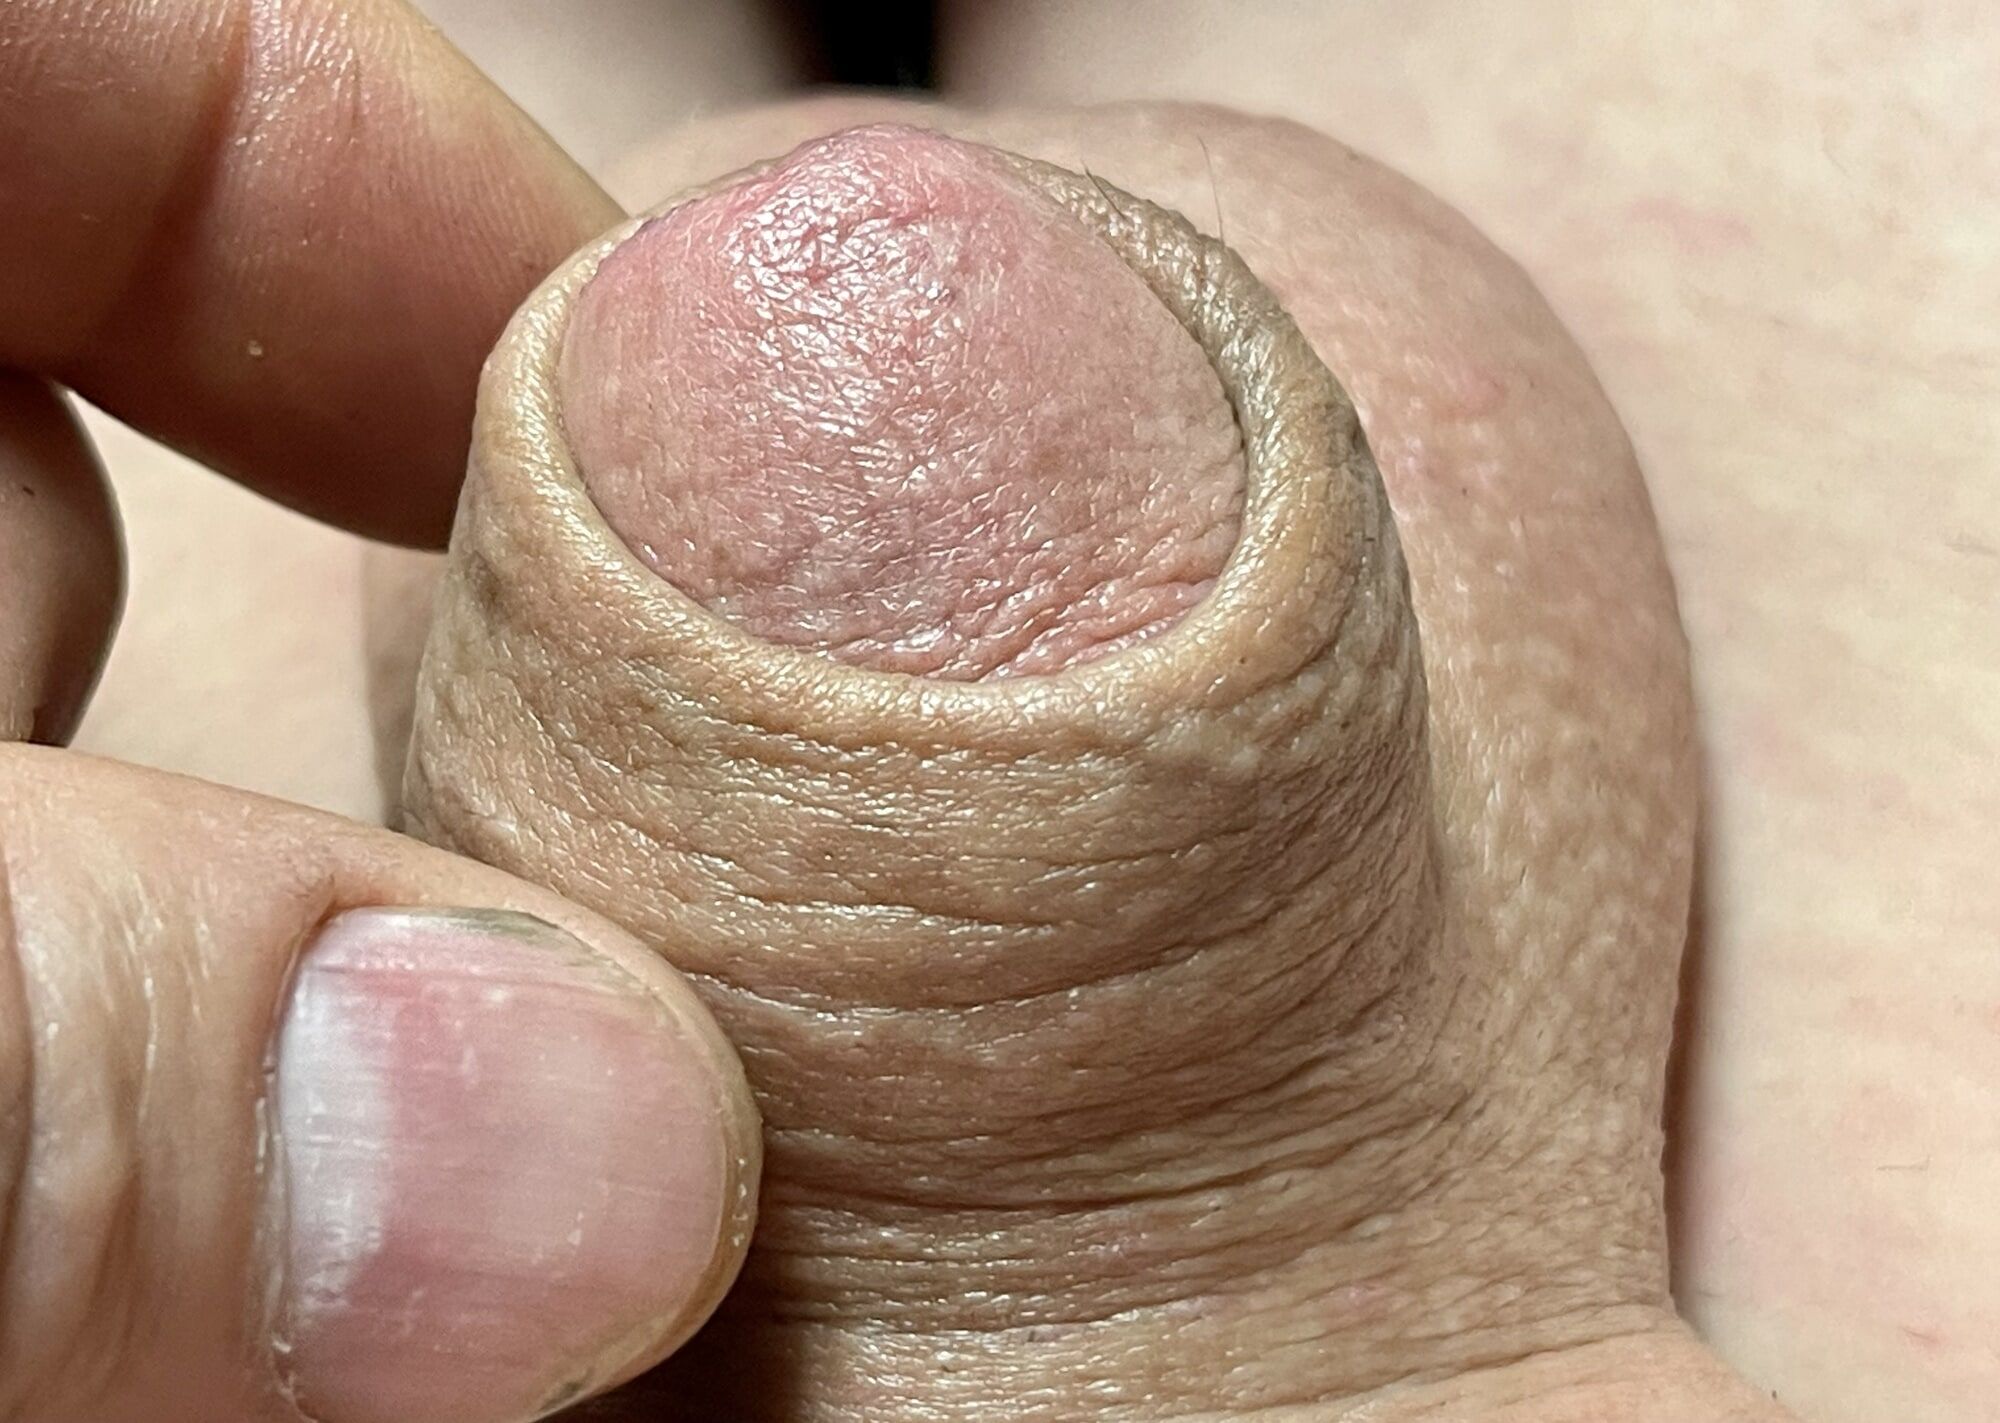 Micropenis close up #6